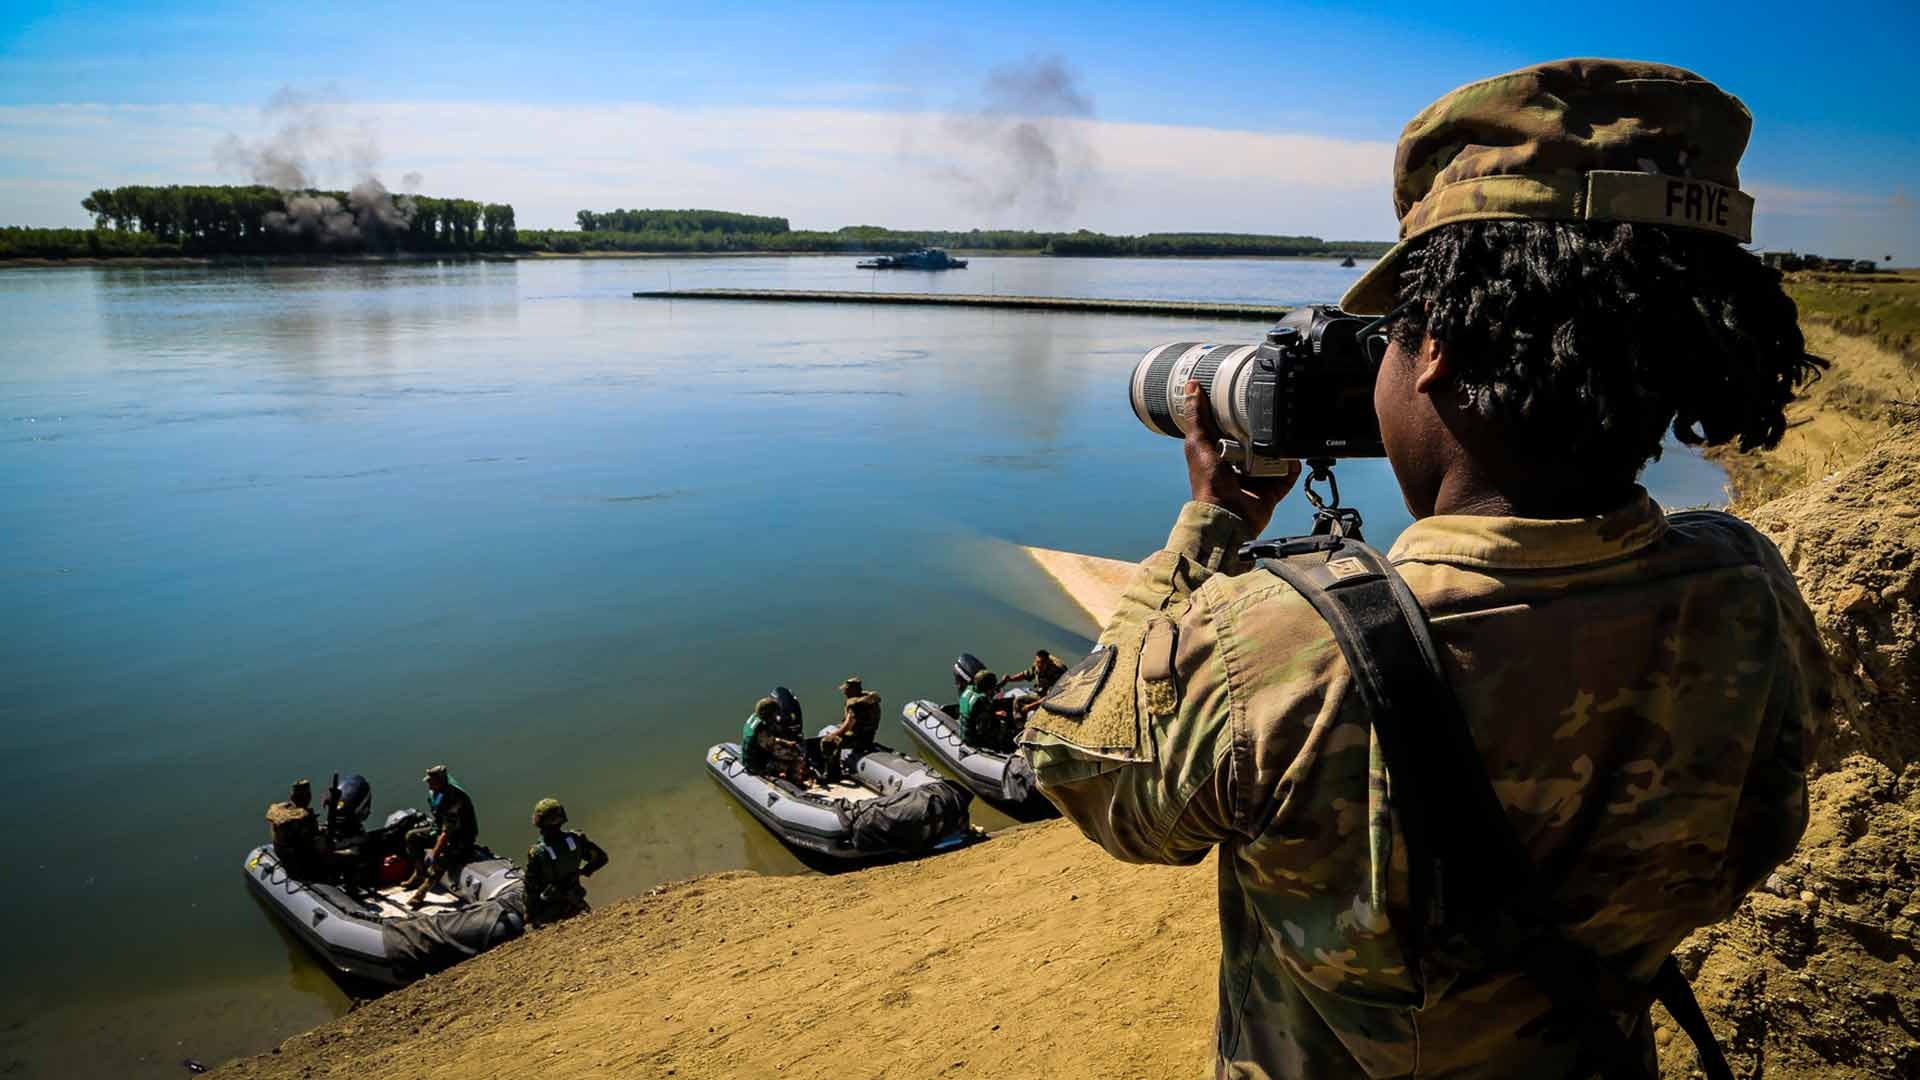 U.S. Army Private First Class Shekinah Frye, photographer assigned to 55th Signal Company (Combat Camera), documents a river crossing exercise during Saber Guardian 17 over the Danube River, Bordusani, Romania, July 15, 2017